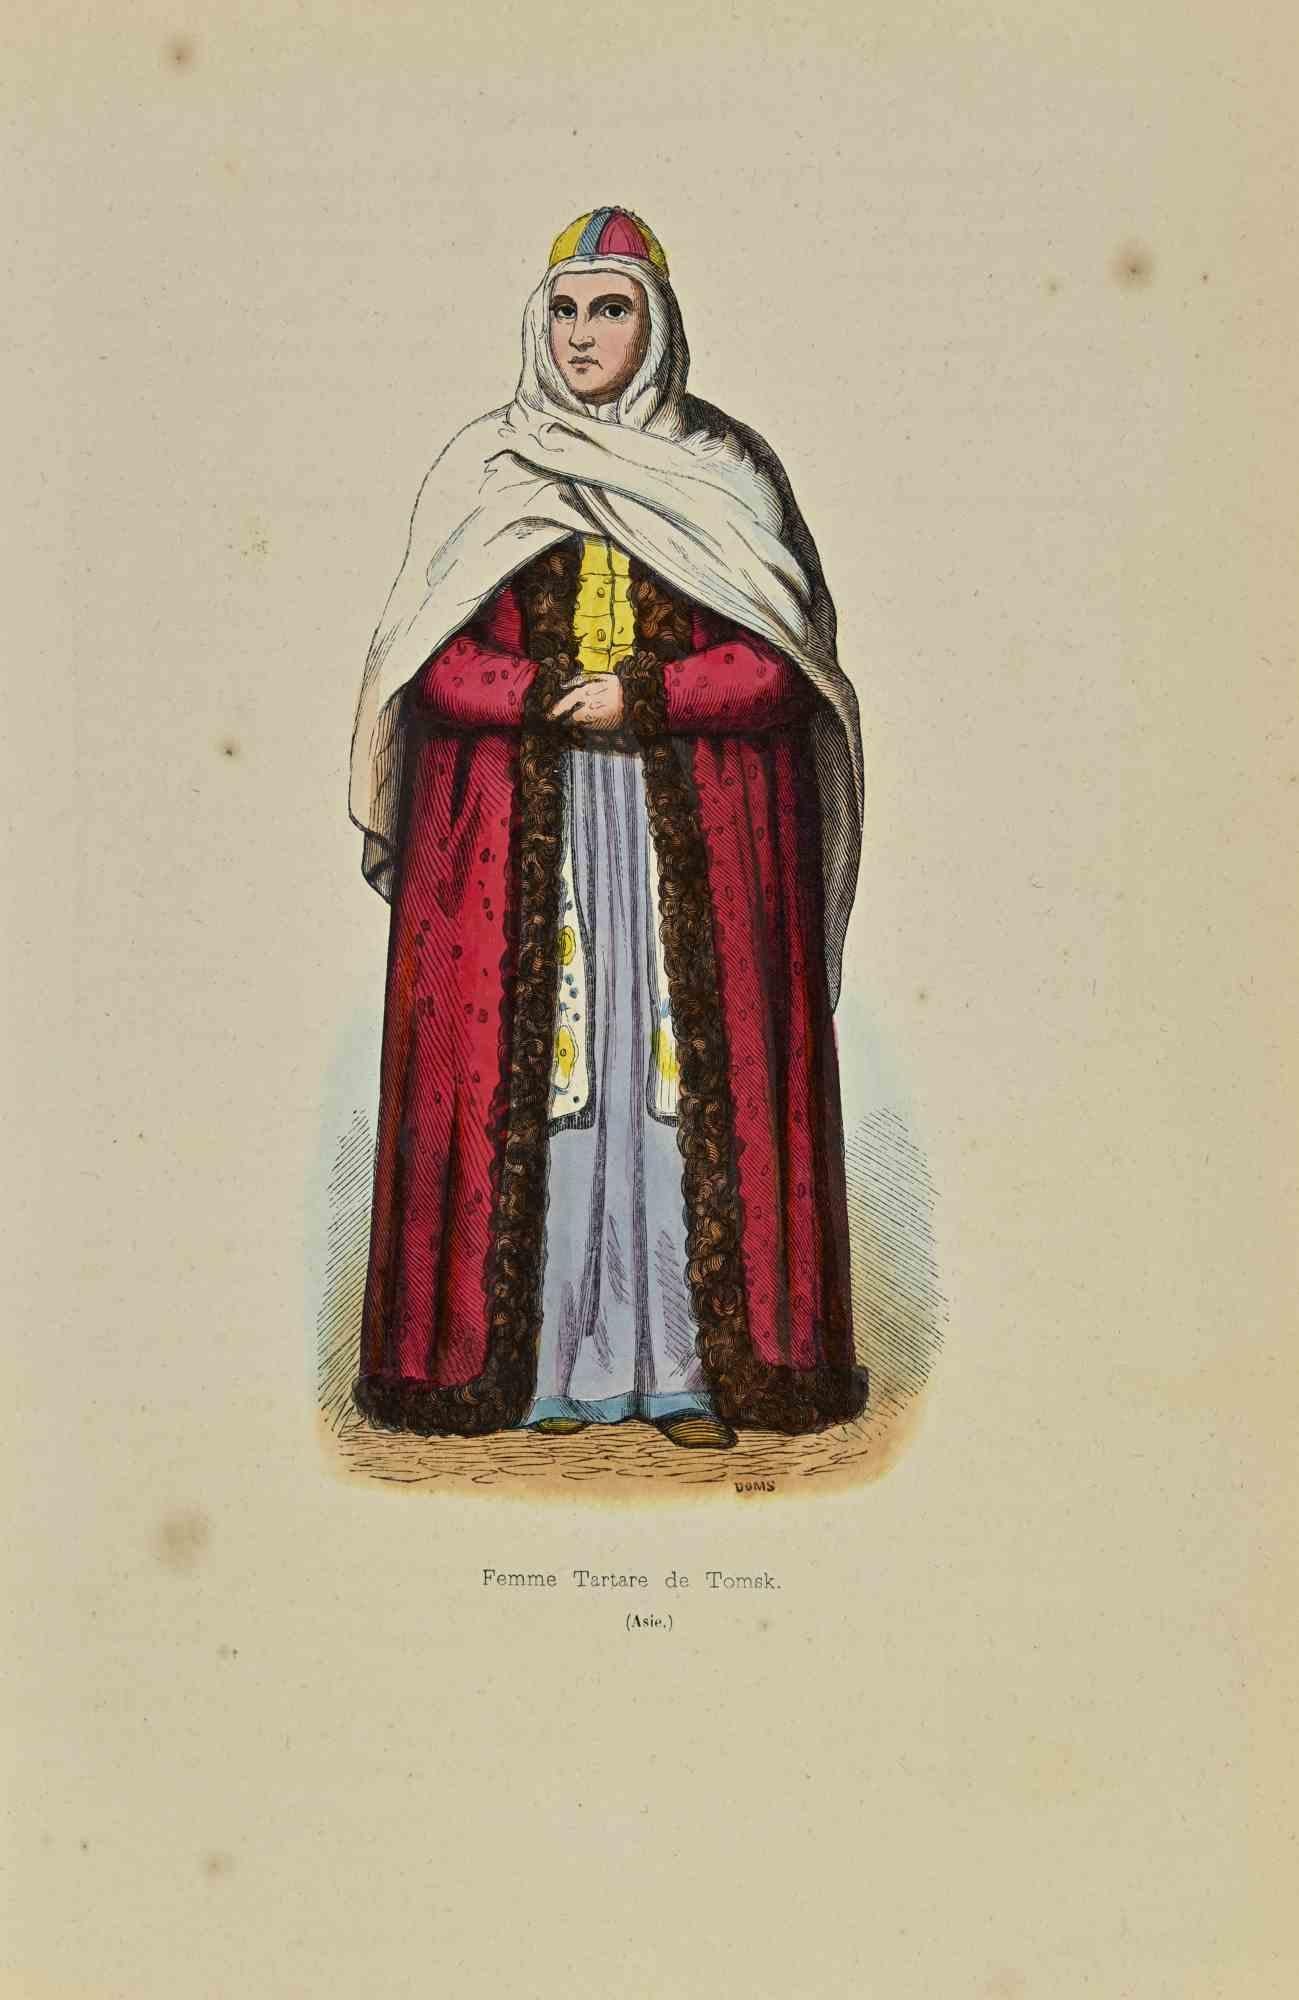 Tomsk Tartar Woman is a lithograph made by Auguste Wahlen in 1844.

Hand colored.

Good condition.

At the center of the artwork is the original title "Femme Tartare de Tomsk".

The work is part of Suite Moeurs, usages et costumes de tous les